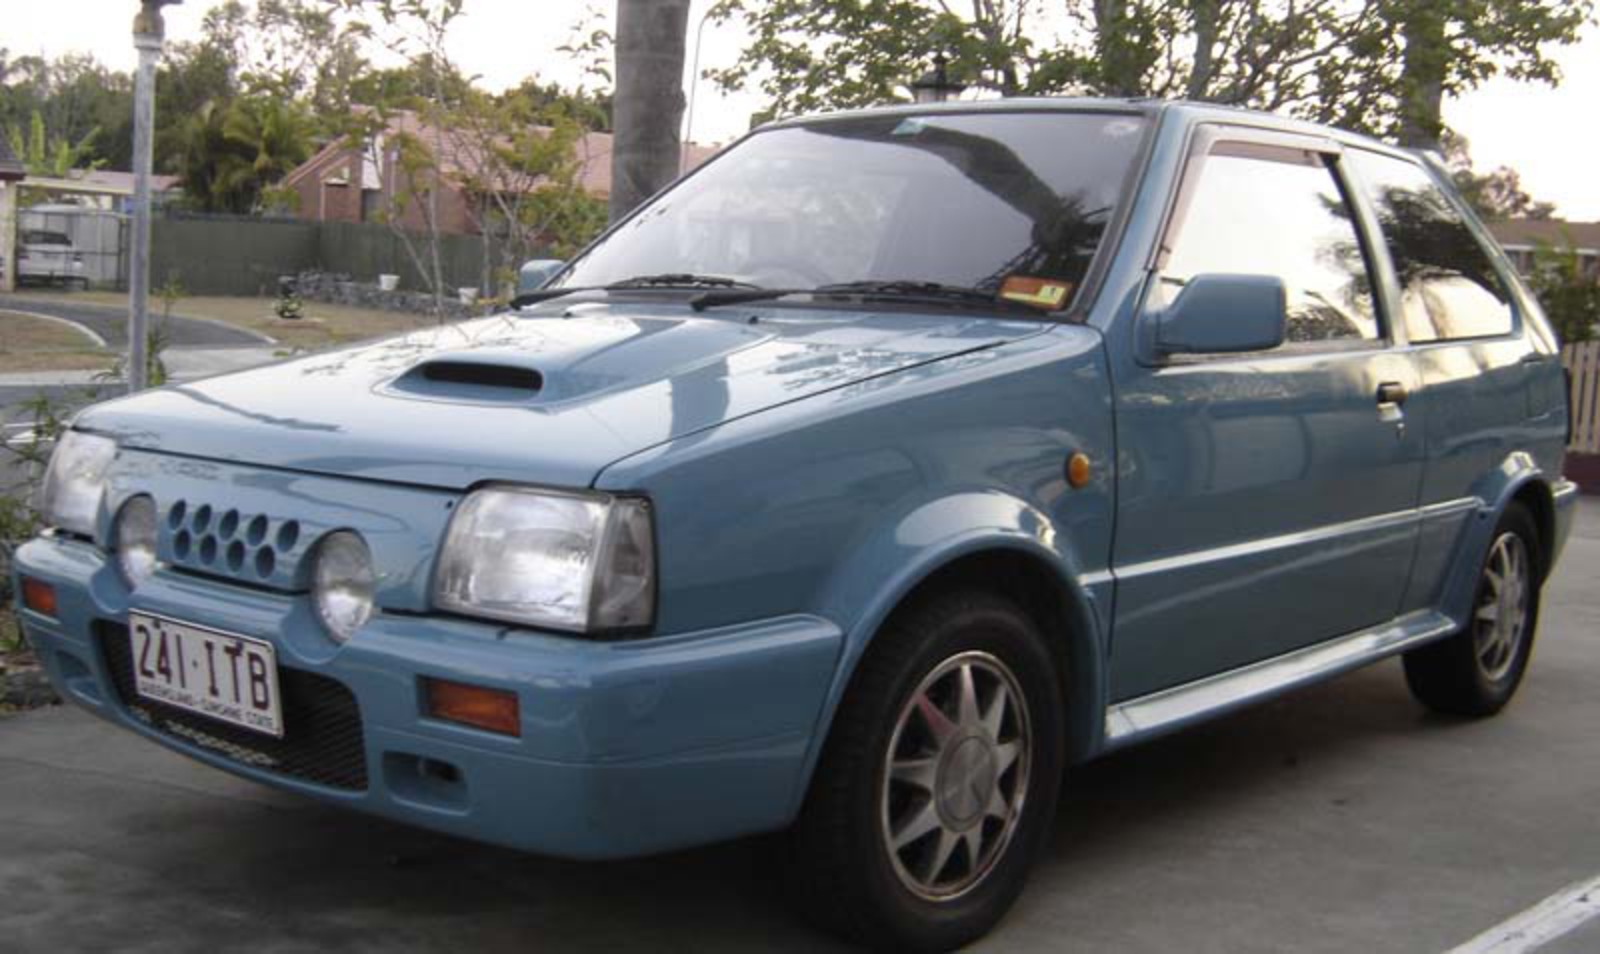 Fs: Ultra Rare Nissan March Super Turbo - For Sale (Private Whole cars only)